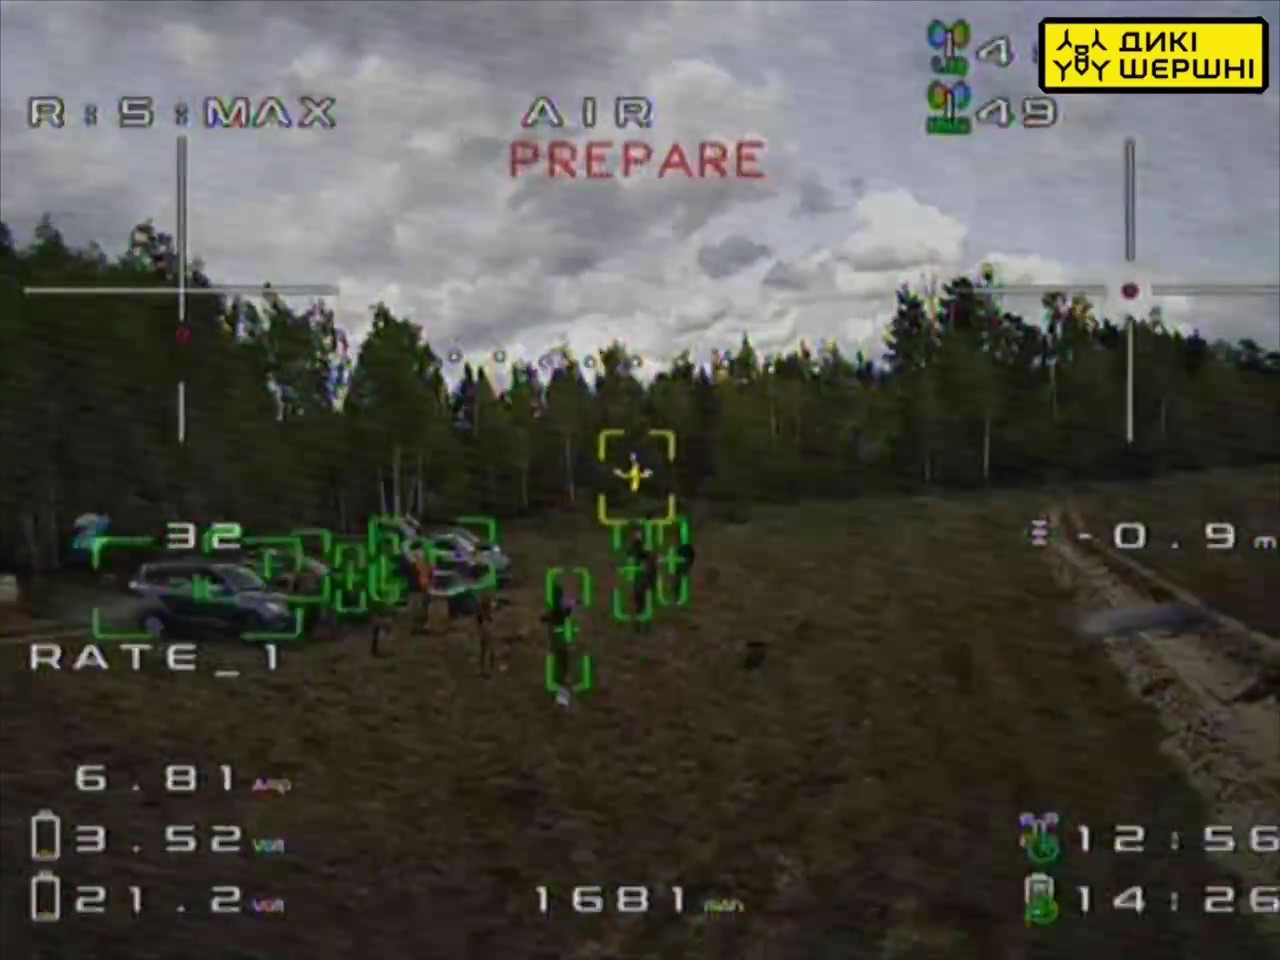 An FPV drone undergoing machine vision training, Defense Express